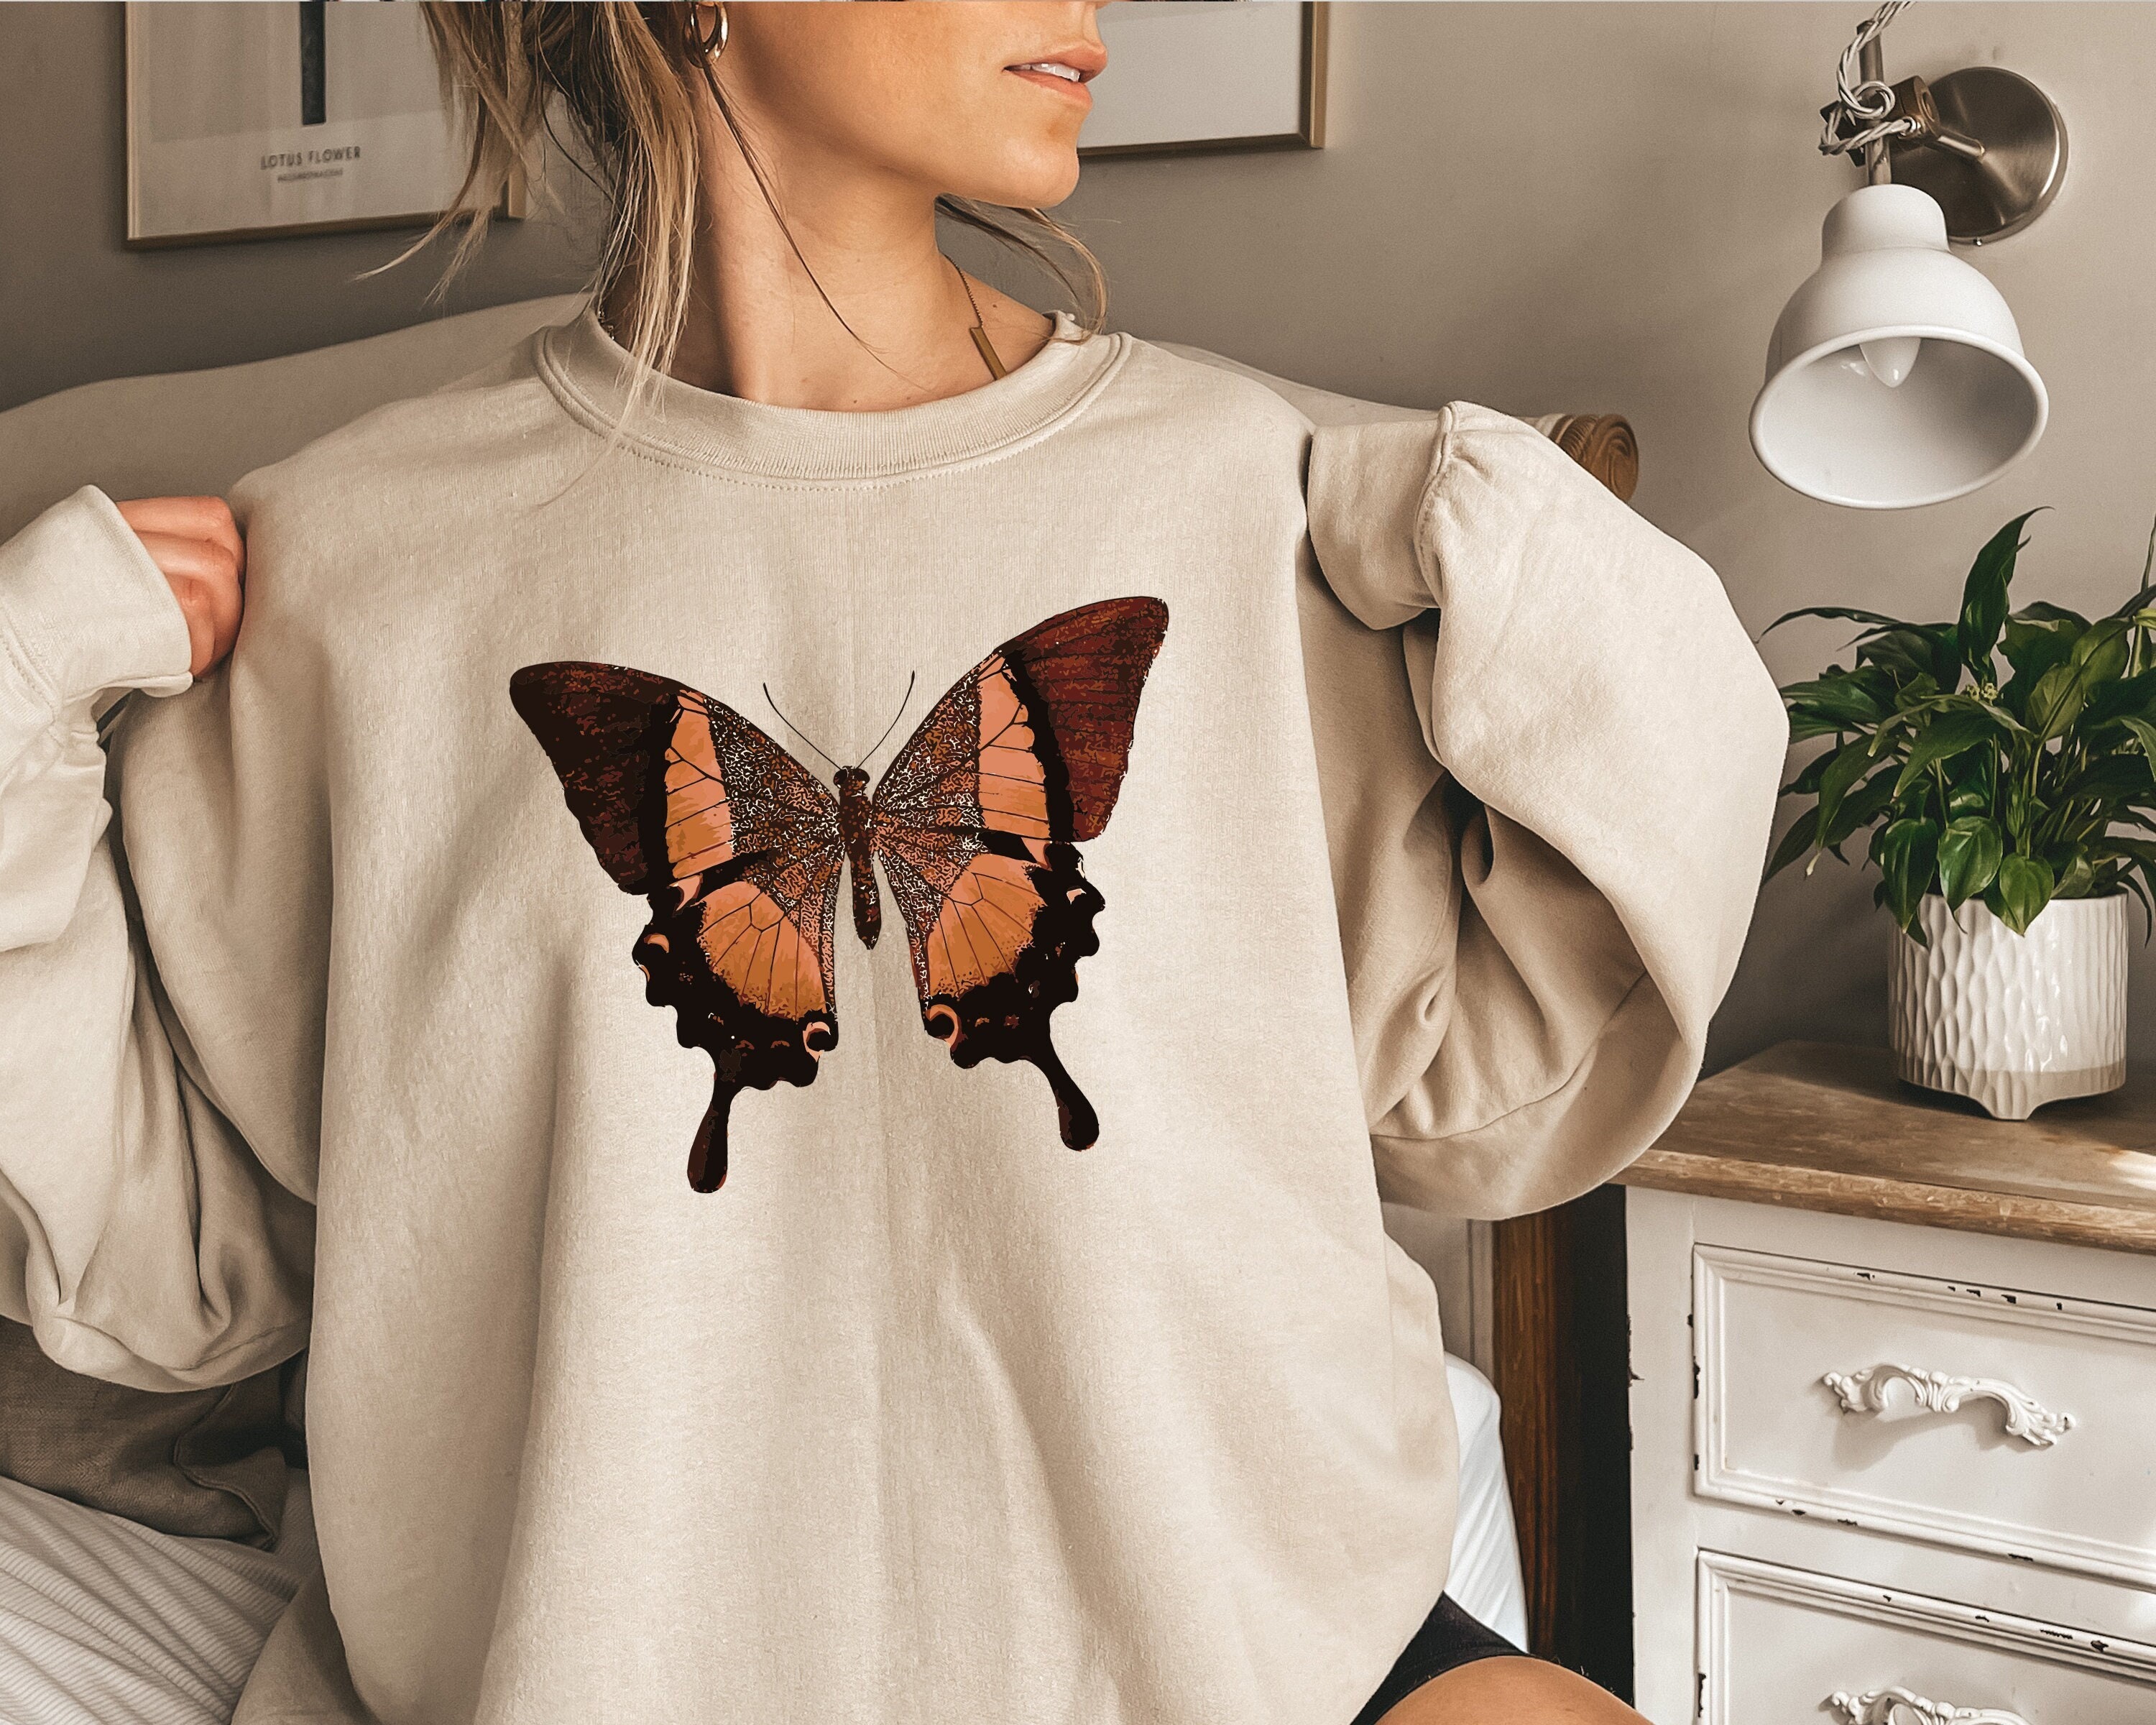 Blue Butterfly Etsy Shirt 